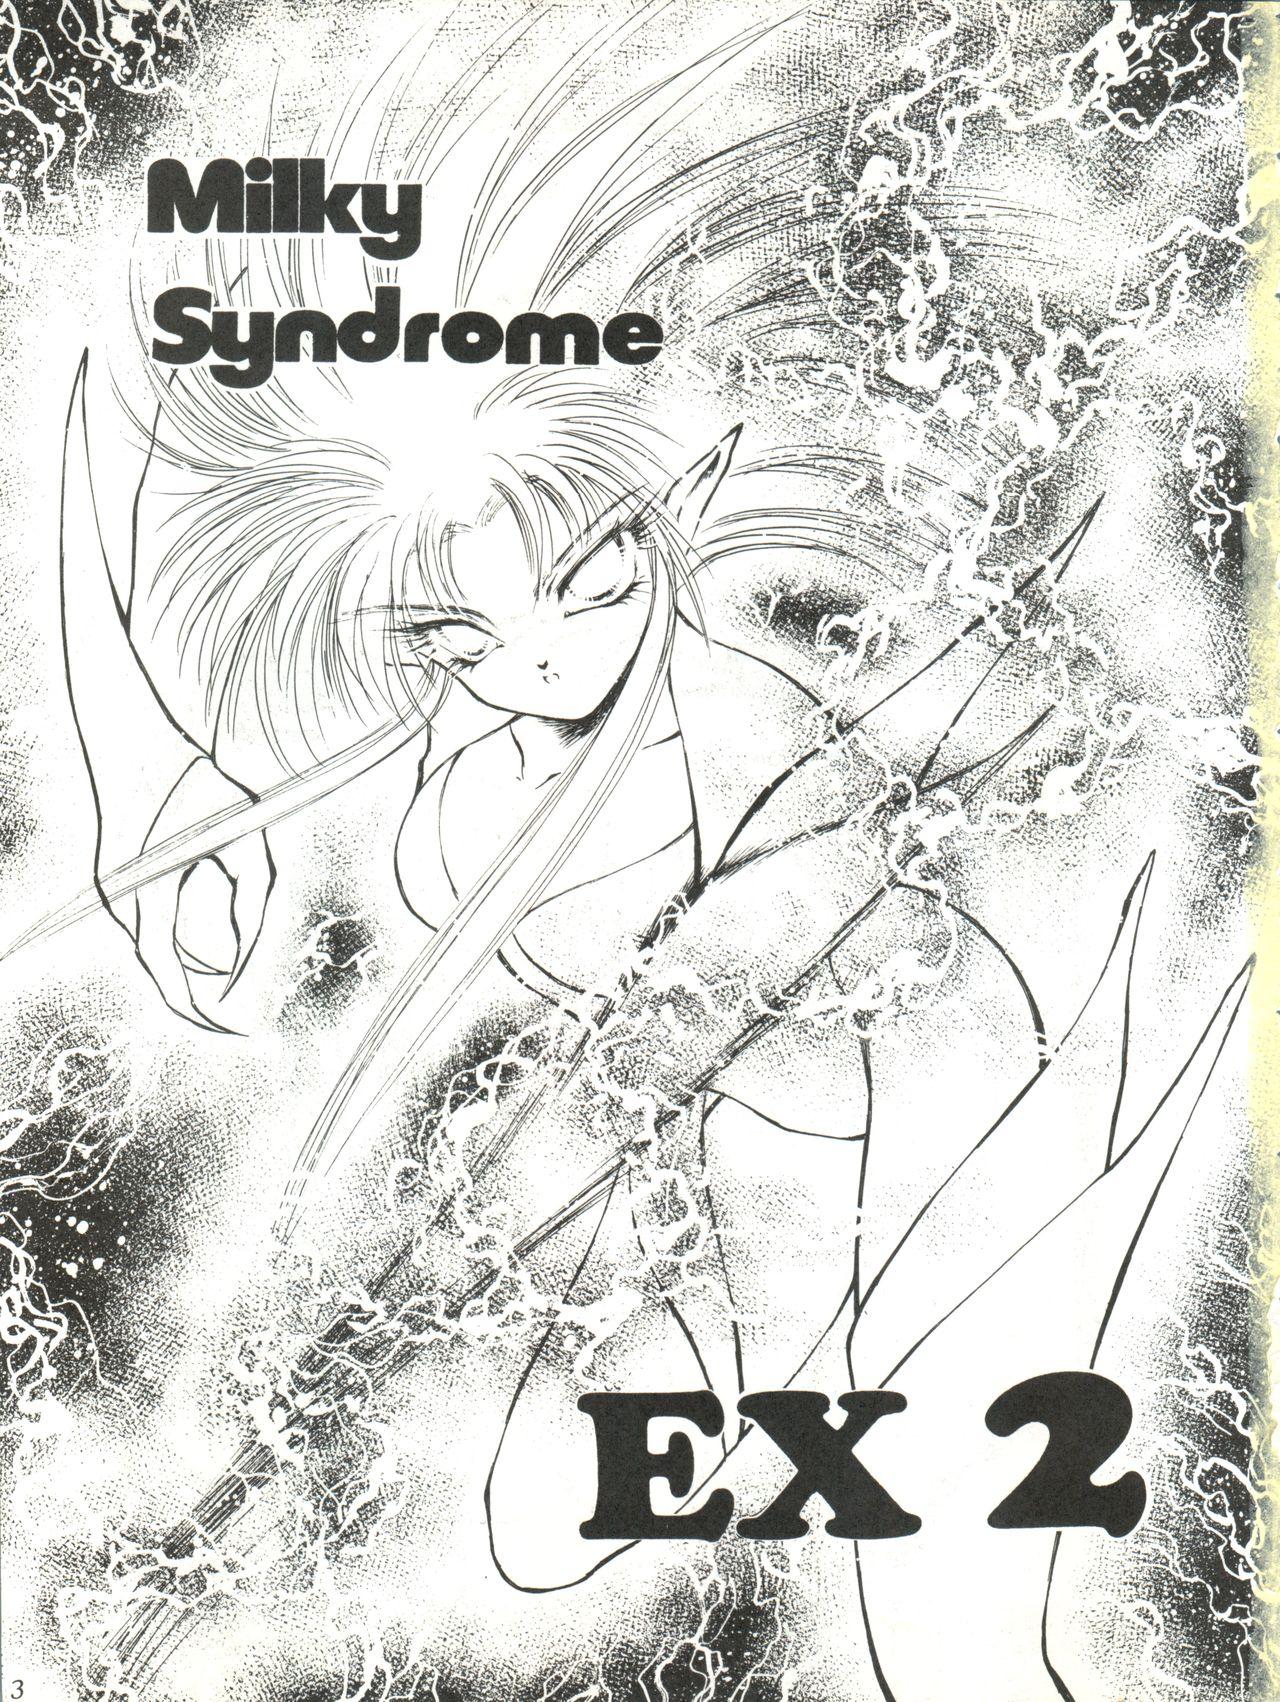 Girl Girl Milky Syndrome EX 2 - Sailor moon Tenchi muyo Pretty sammy Ghost sweeper mikami Ng knight lamune and 40 Tiny - Page 3